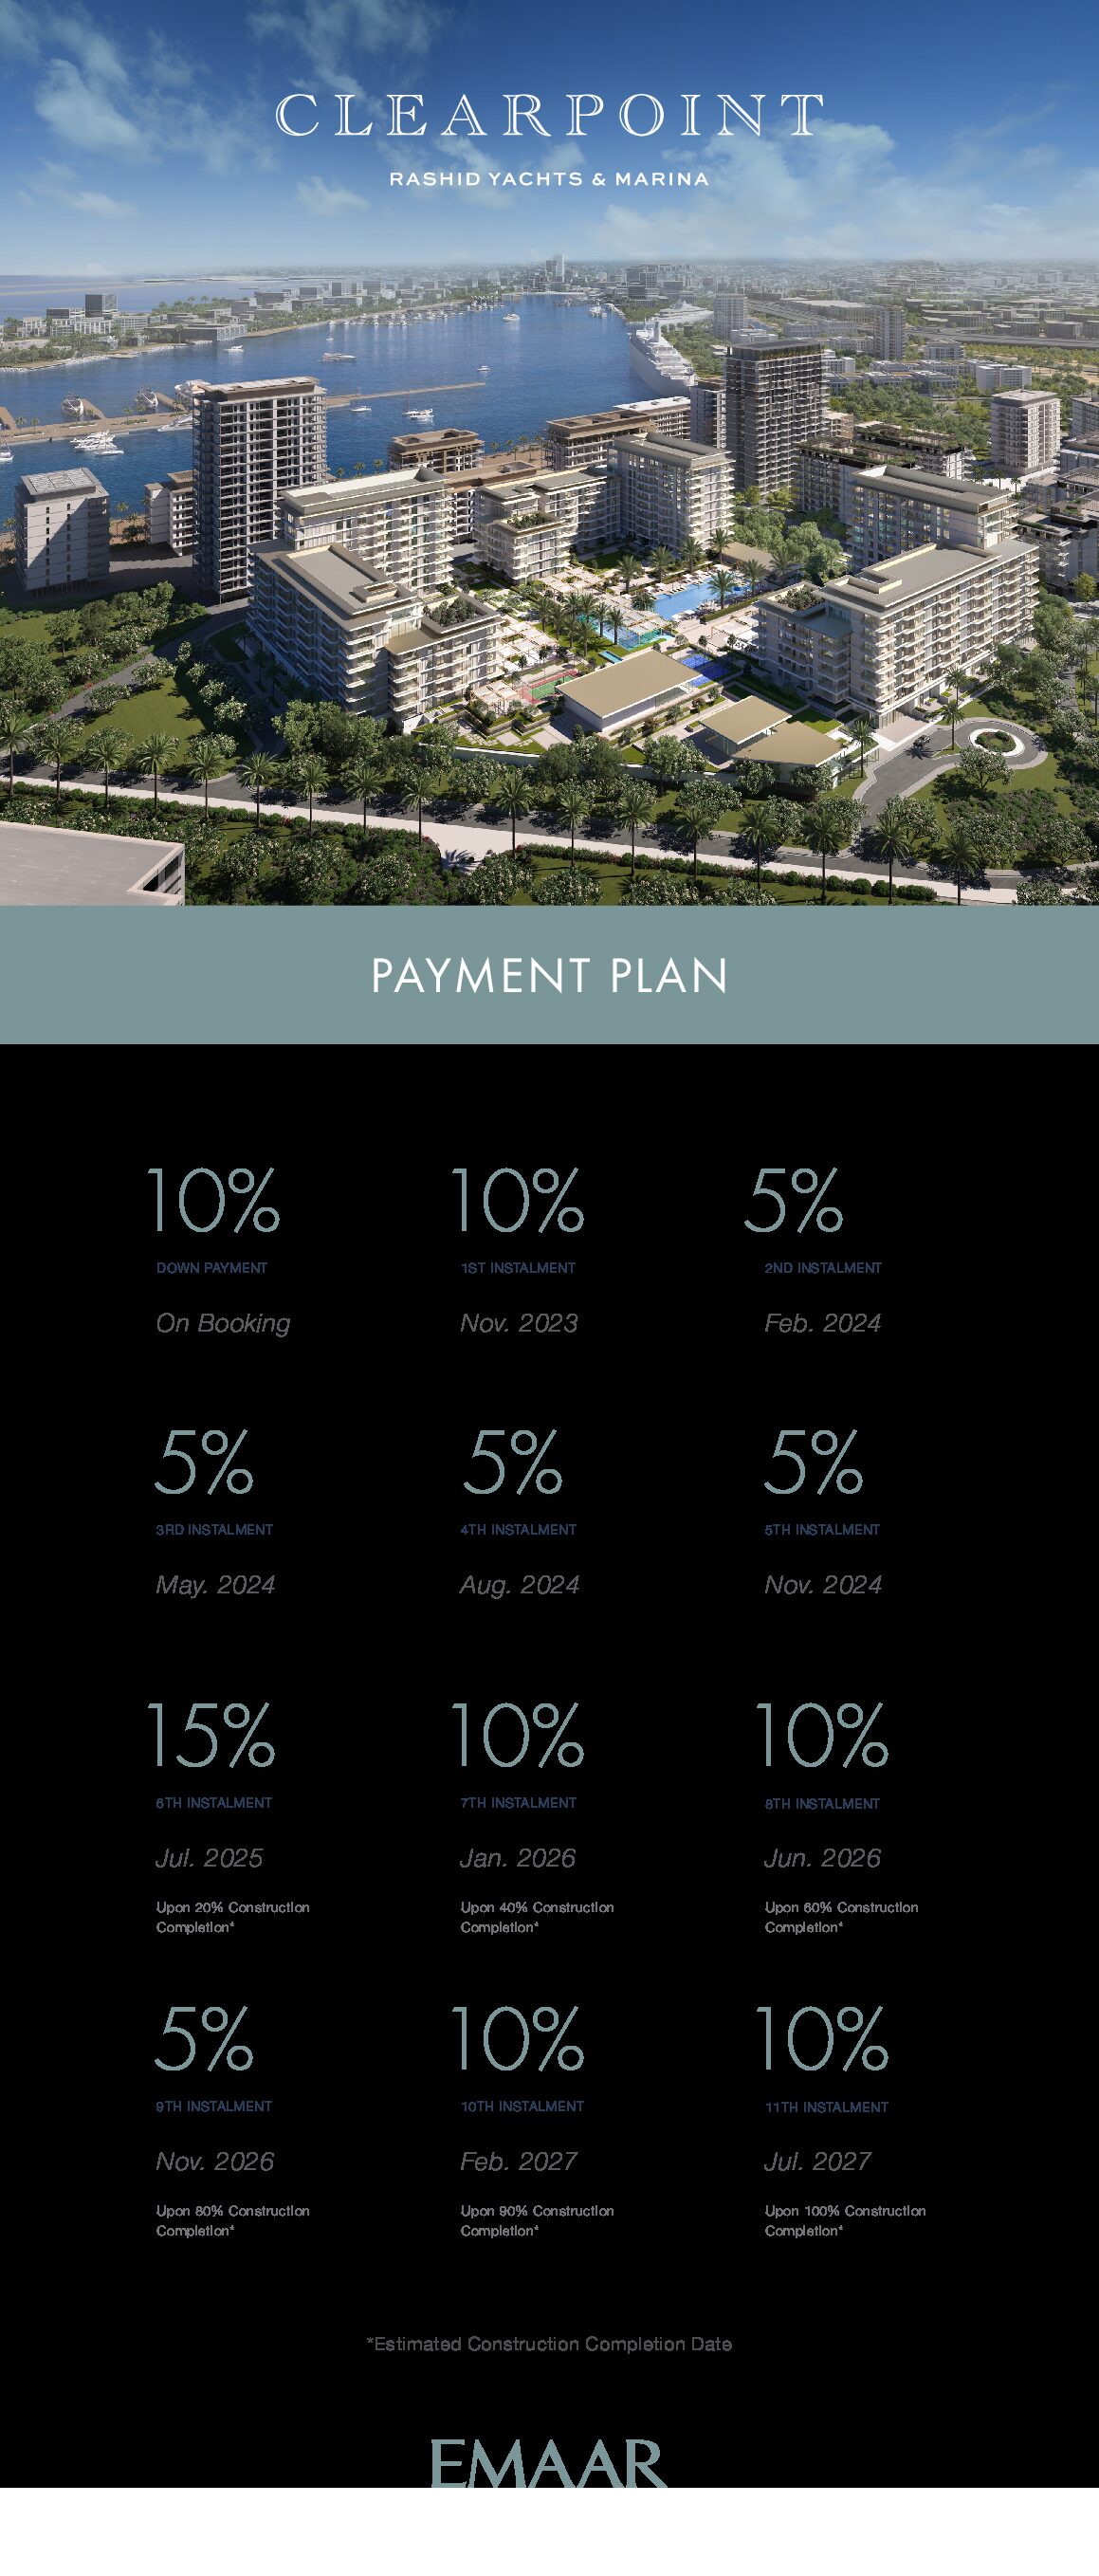 CLEARPOINT_RYM_PAYMENT_PLAN